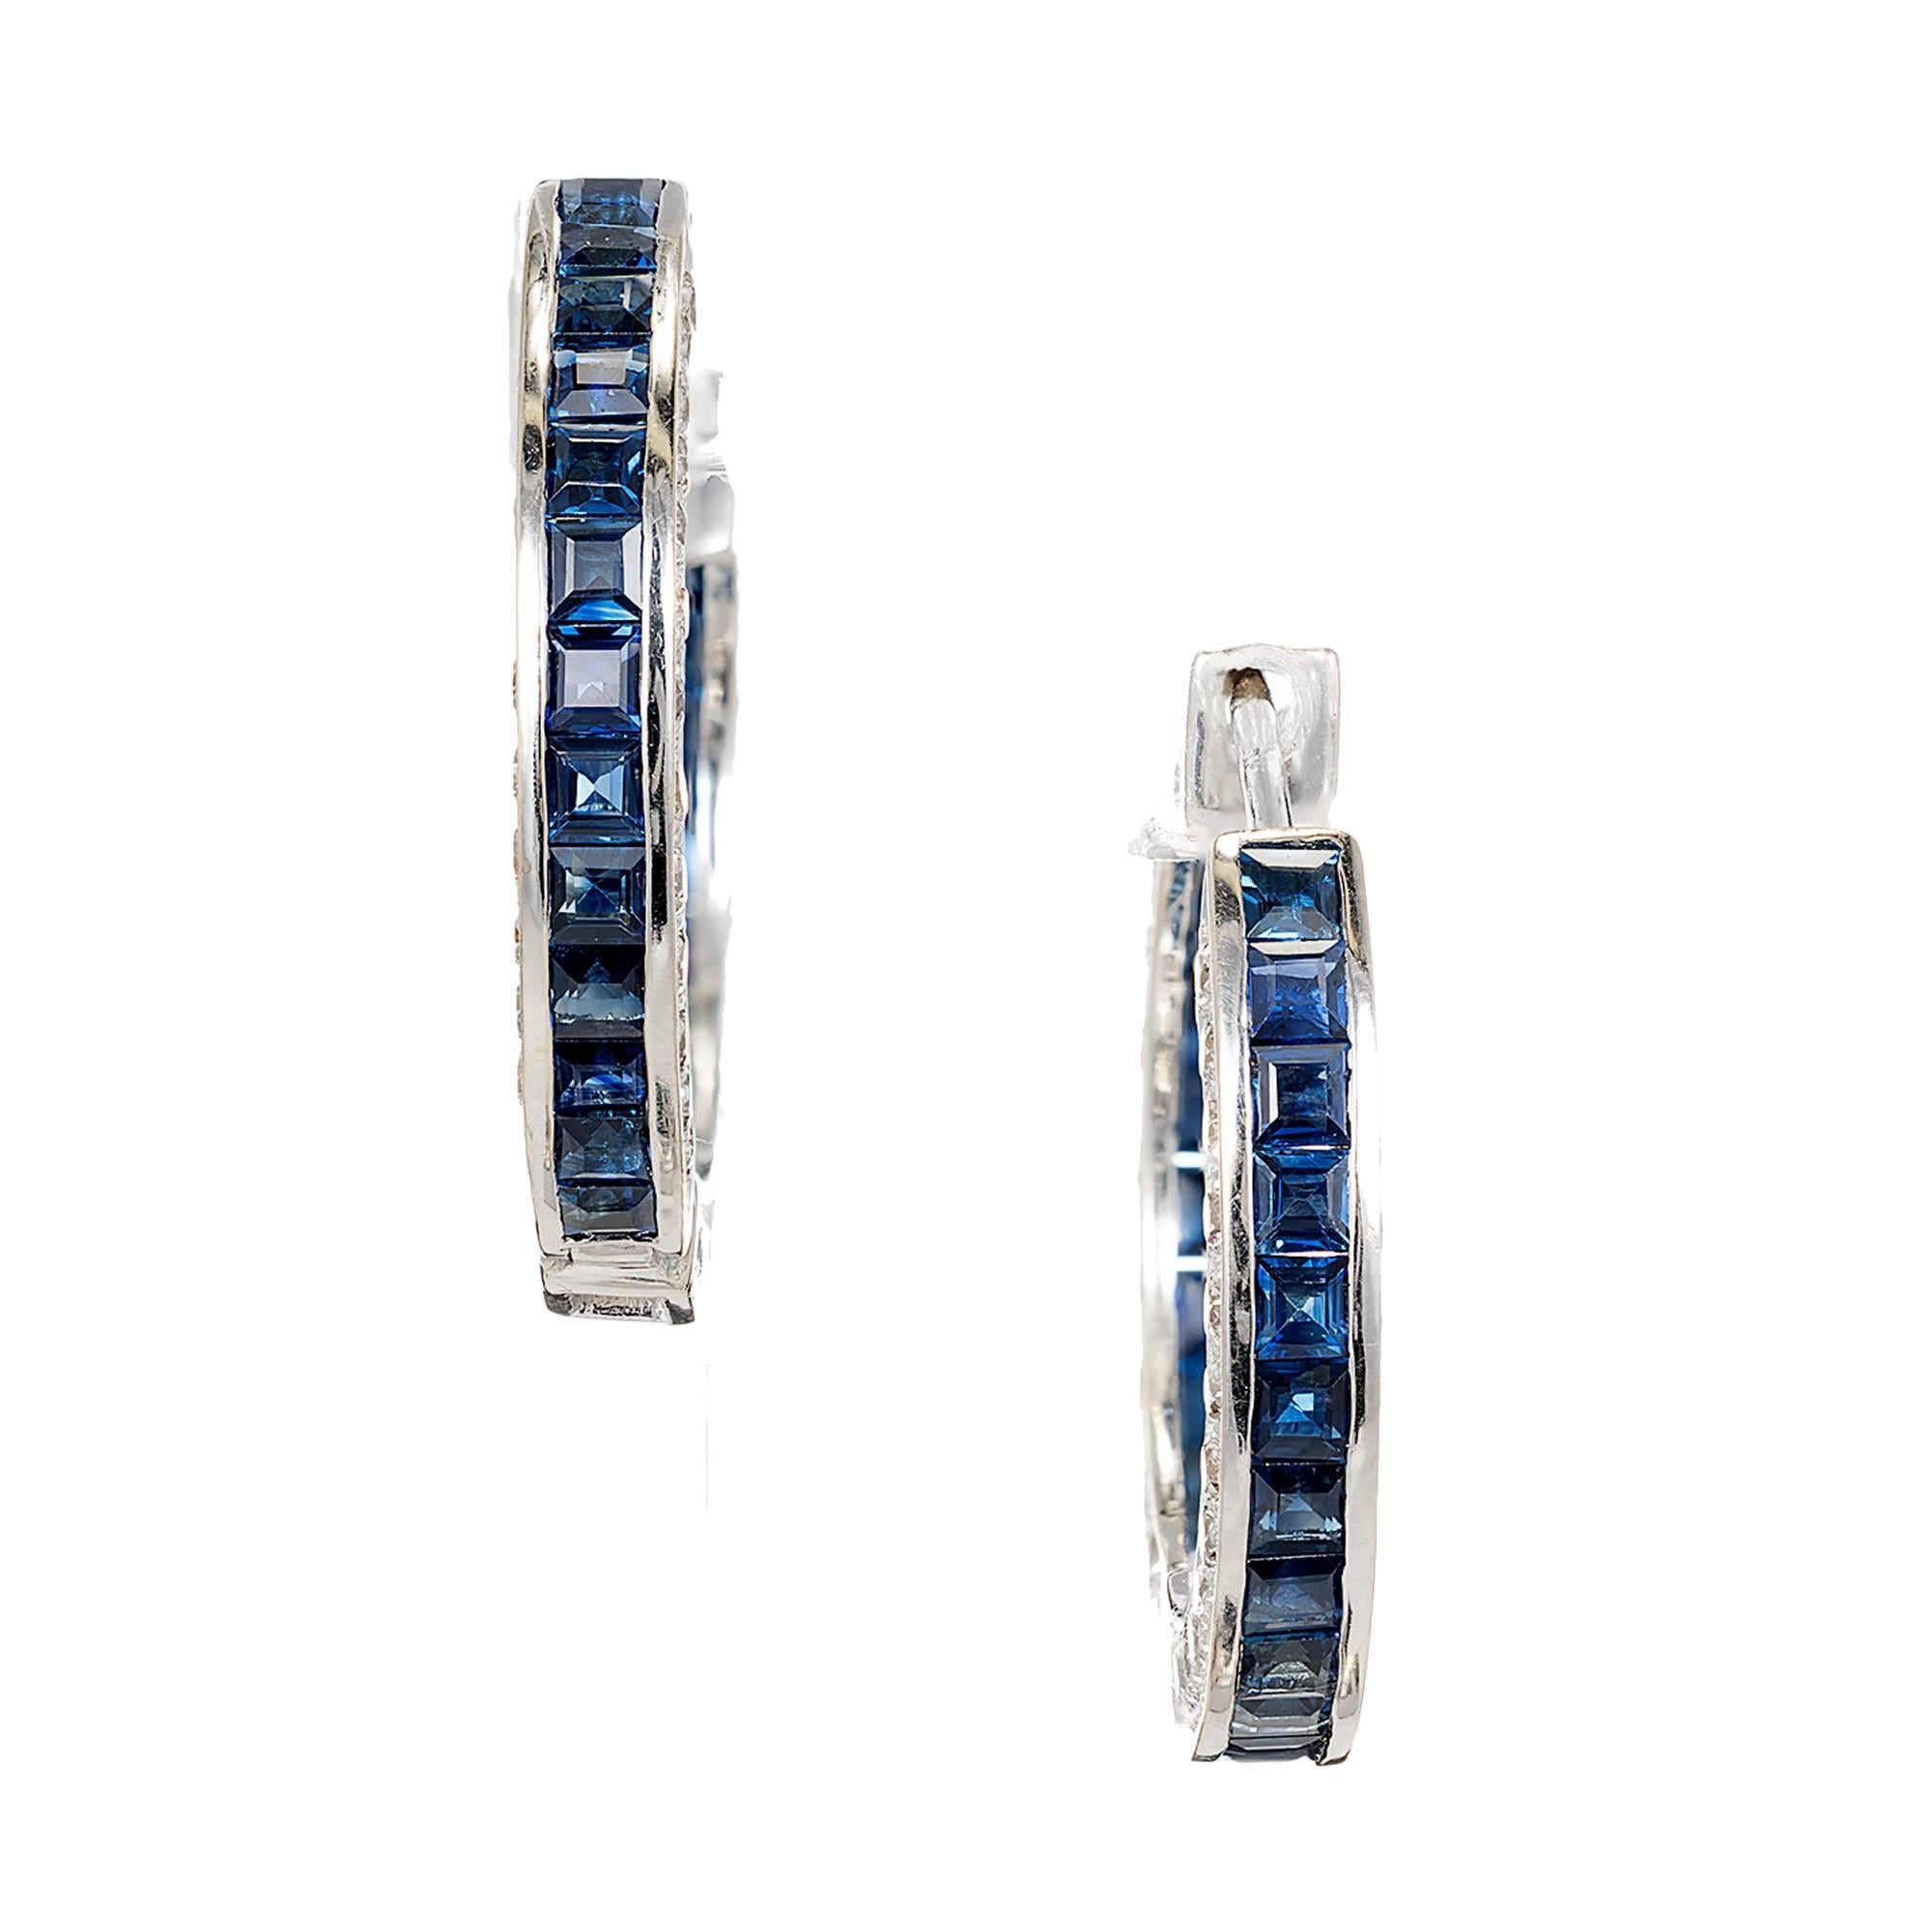 Huggie style sapphire and diamond 18k white gold hinged hoop earrings with Pavé set Diamond sides and channel set inside out center and back.

46 square blue Sapphires, approx. total weight 3.65cts, 2mm
96 round Diamonds, approx. total weight